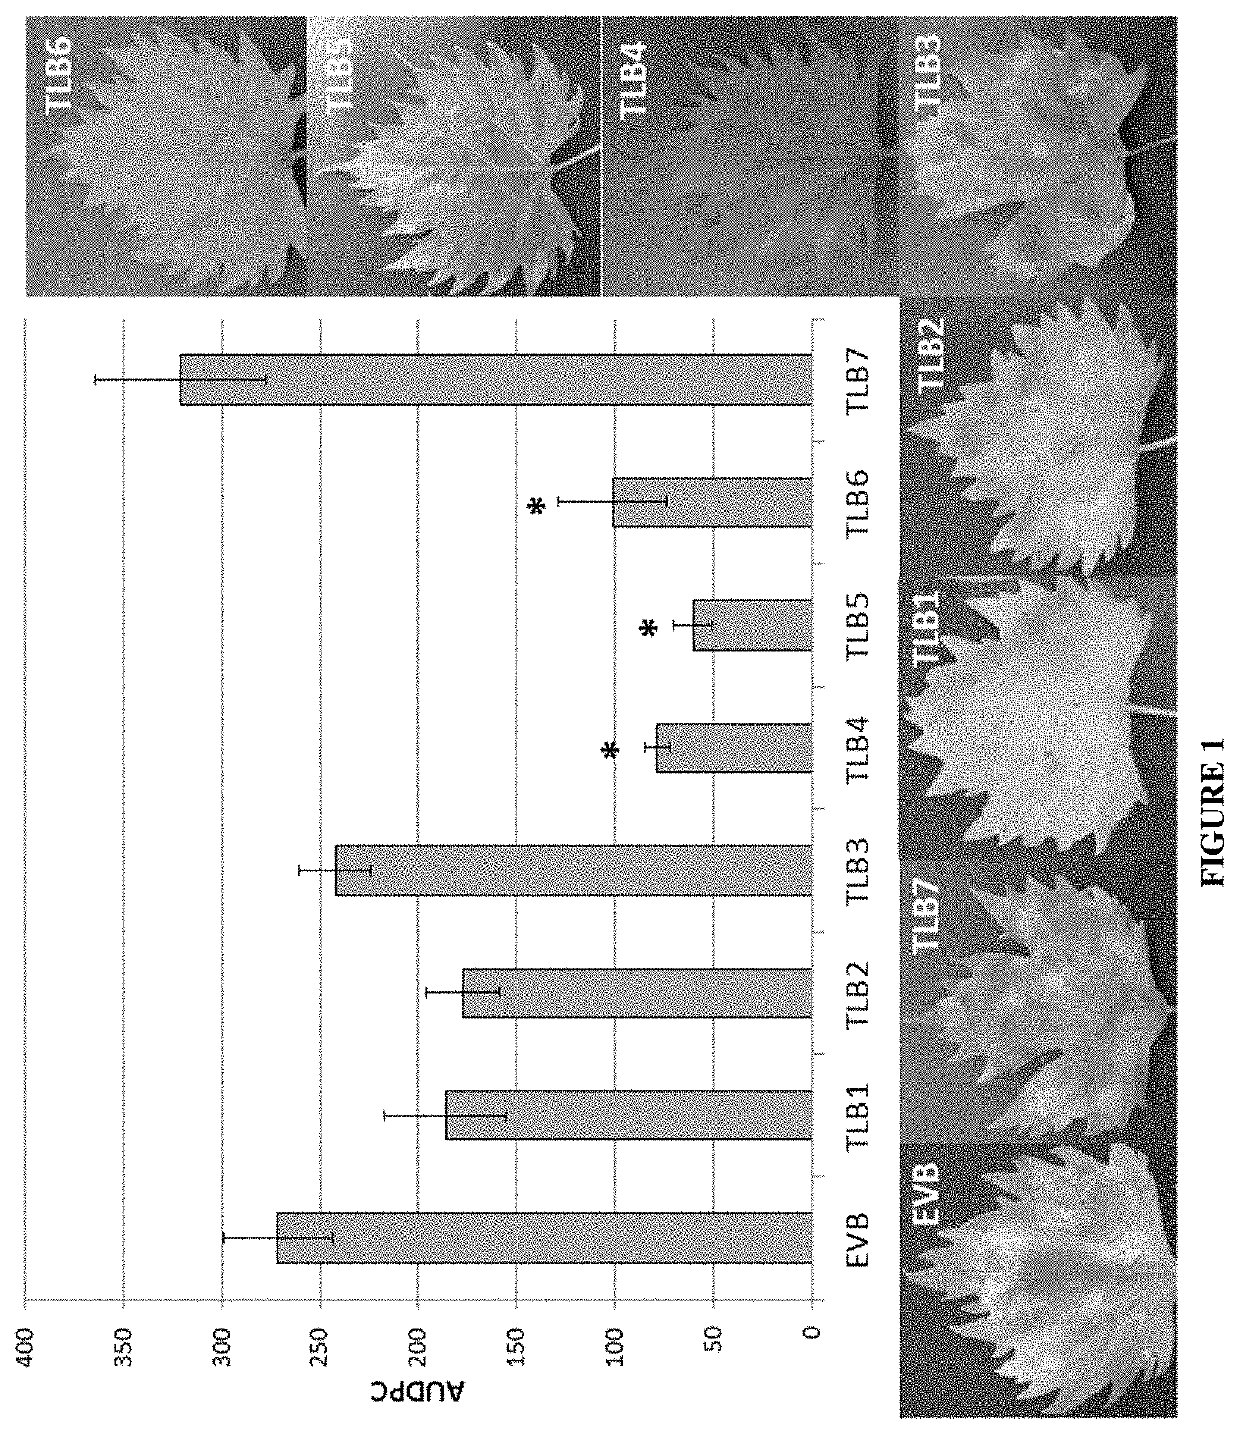 Vitis Vinifera with Reduced MLO Expression and Increased Resistance to Powdery Mildew